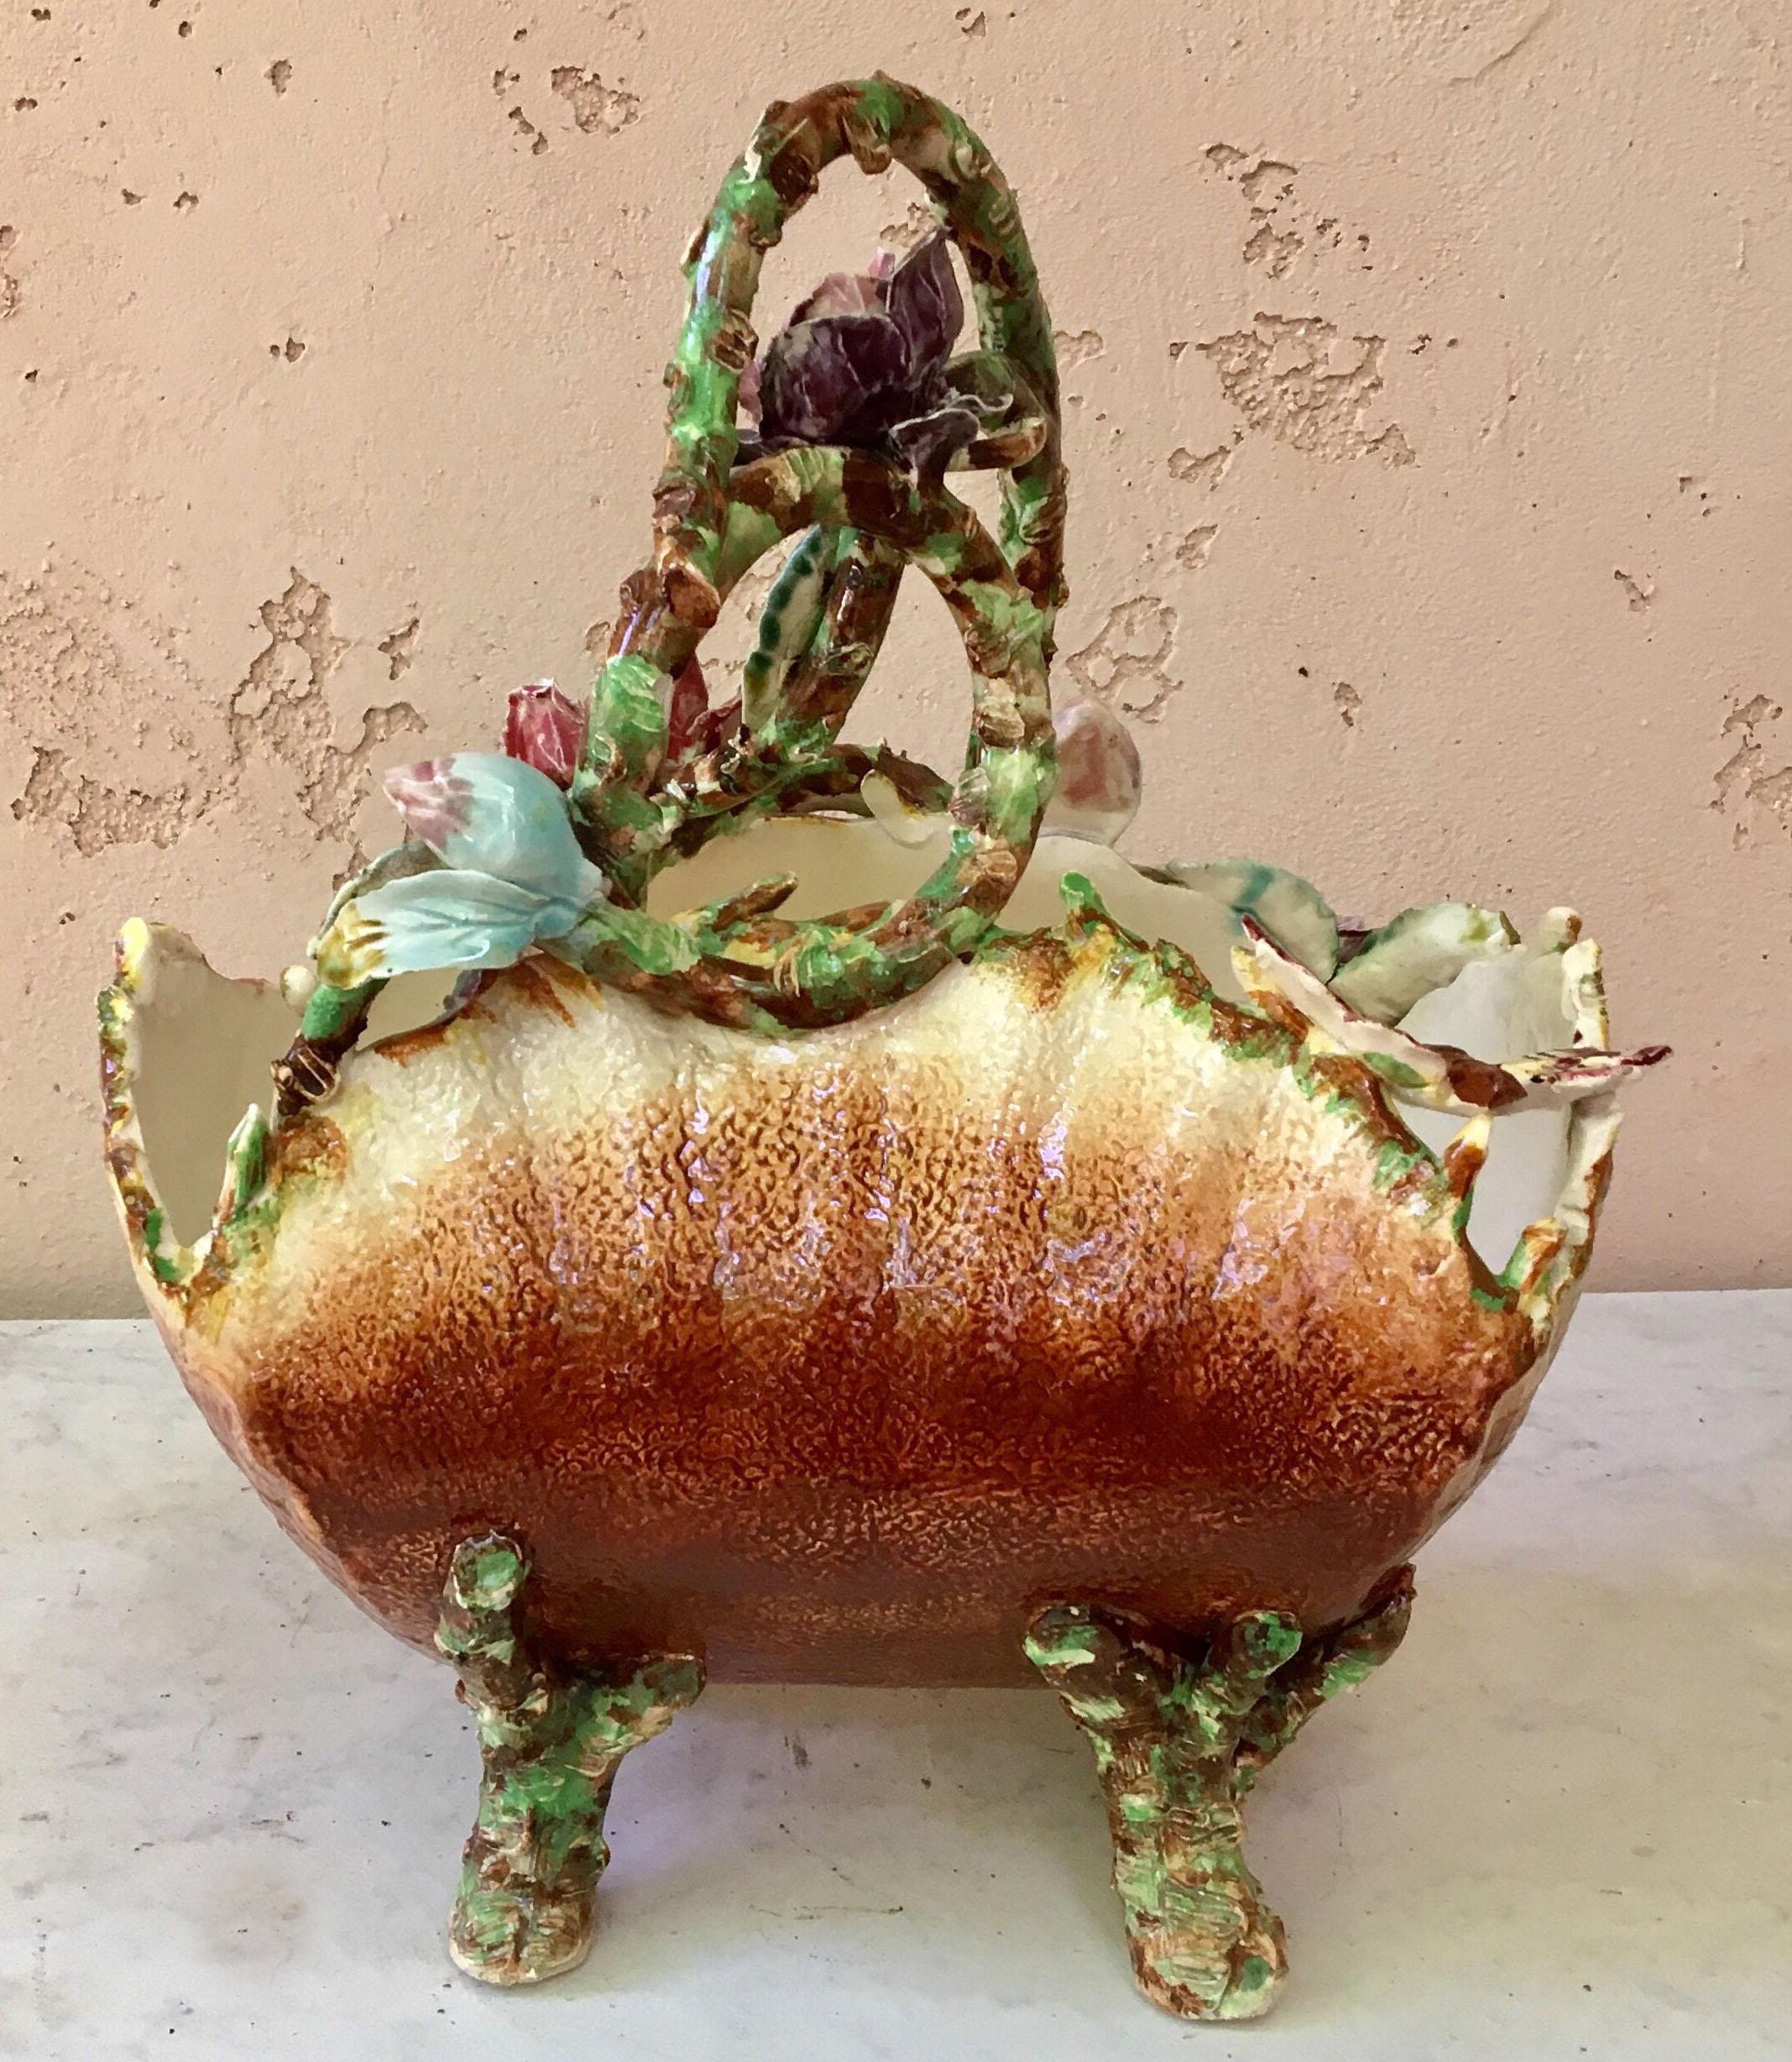 Antique French majolica basket with flowers and butterfly, bug, and insect accents, circa 1880. No maker's mark. Some chips.